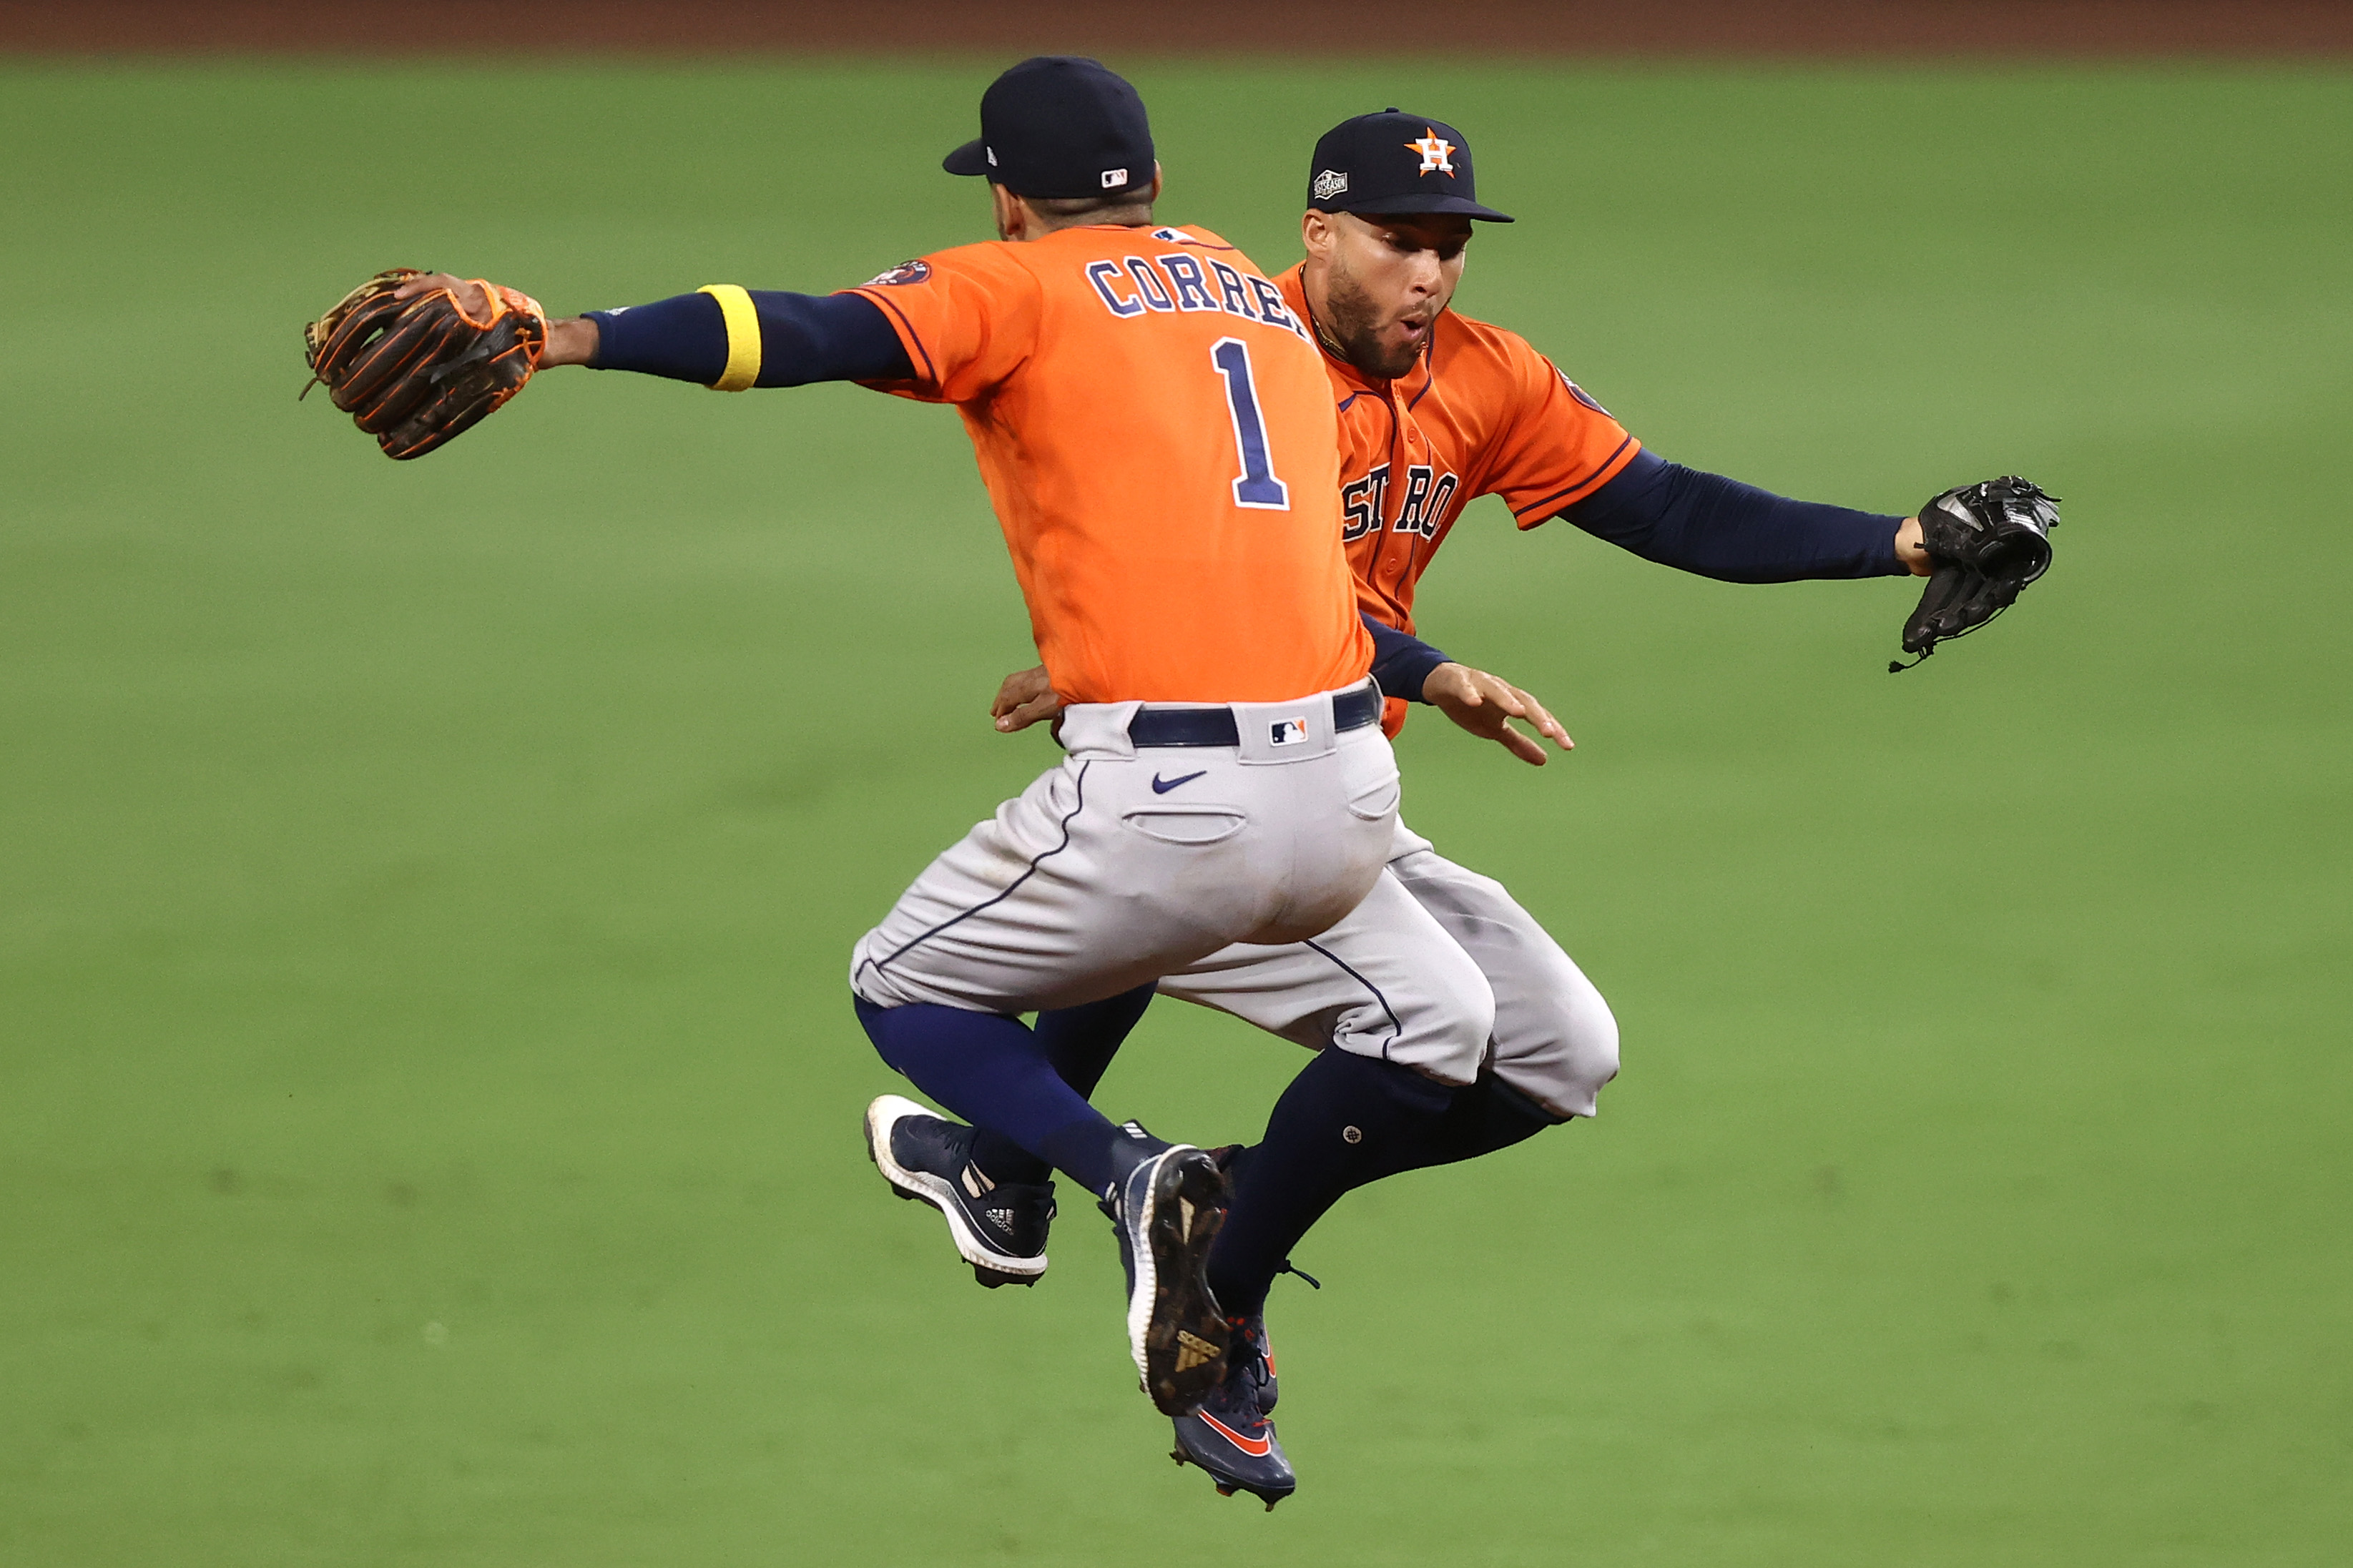 The Houston Astros continue to frustrate their haters.